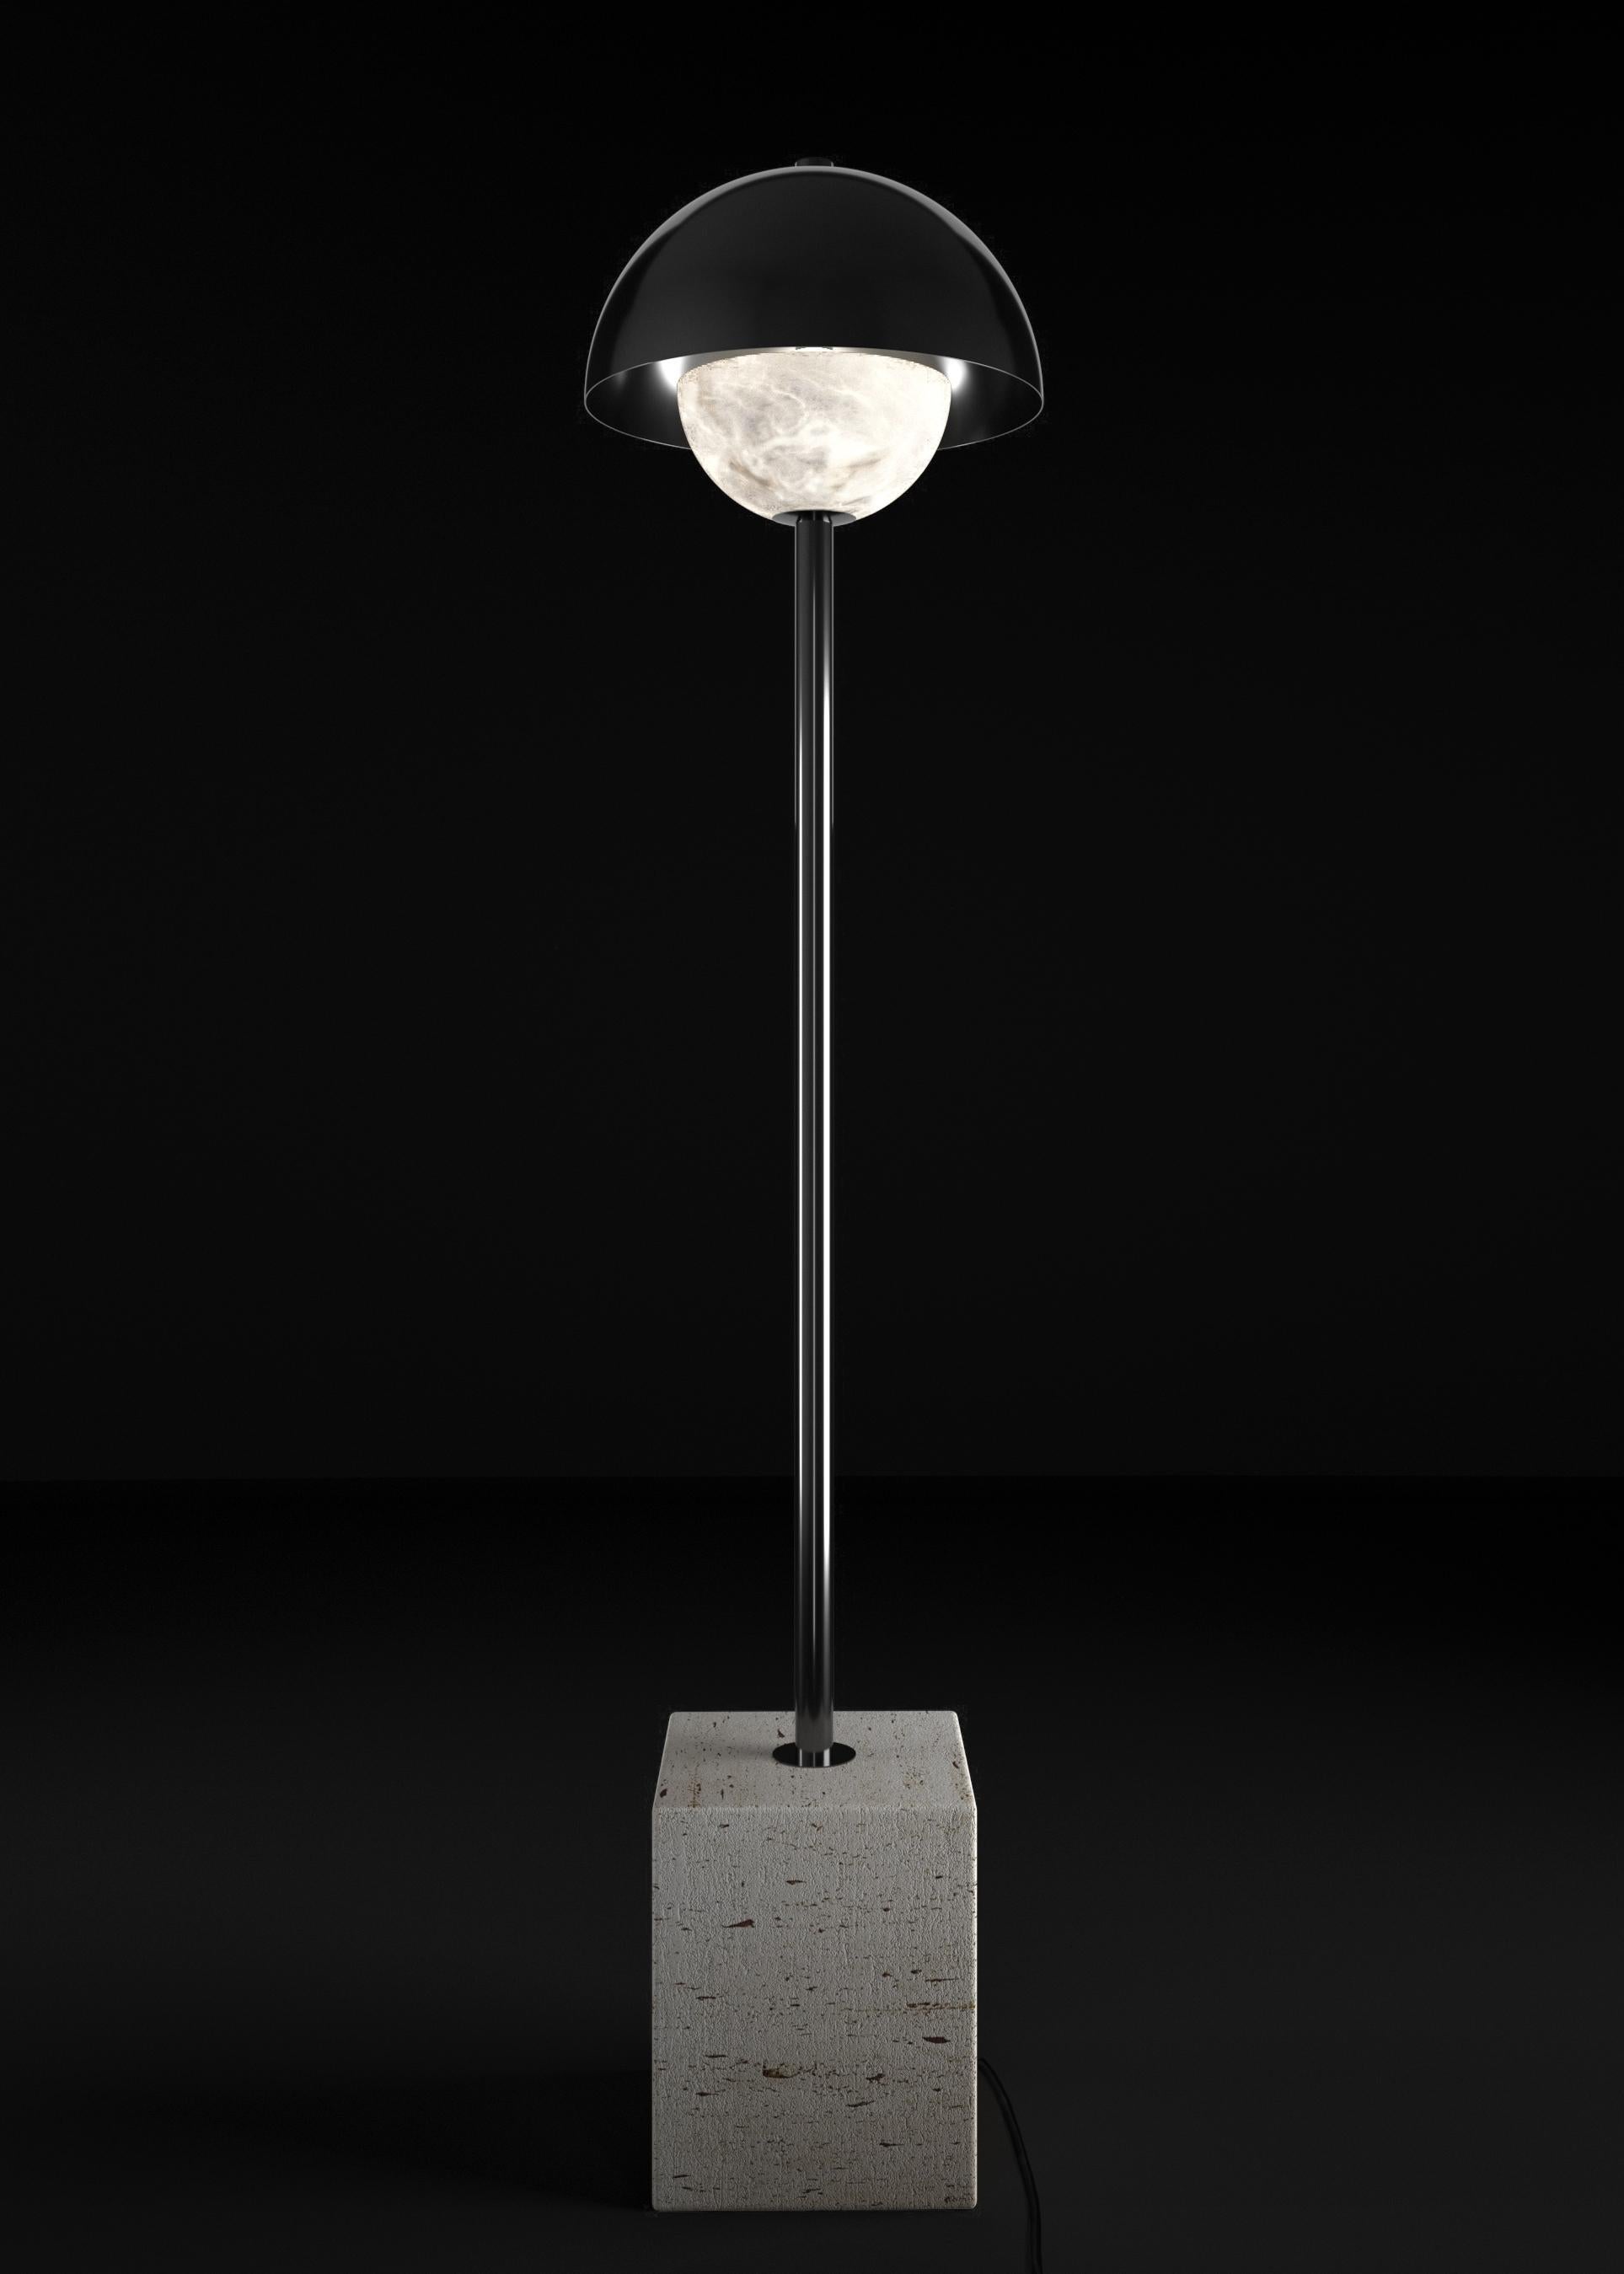 Apollo Shiny Black Metal Floor Lamp by Alabastro Italiano
Dimensions: D 30 x W 30 x H 130 cm.
Materials: White alabaster, marble, black silk cables and metal.

Available in different finishes: Shiny Silver, Bronze, Brushed Brass, Ruggine of